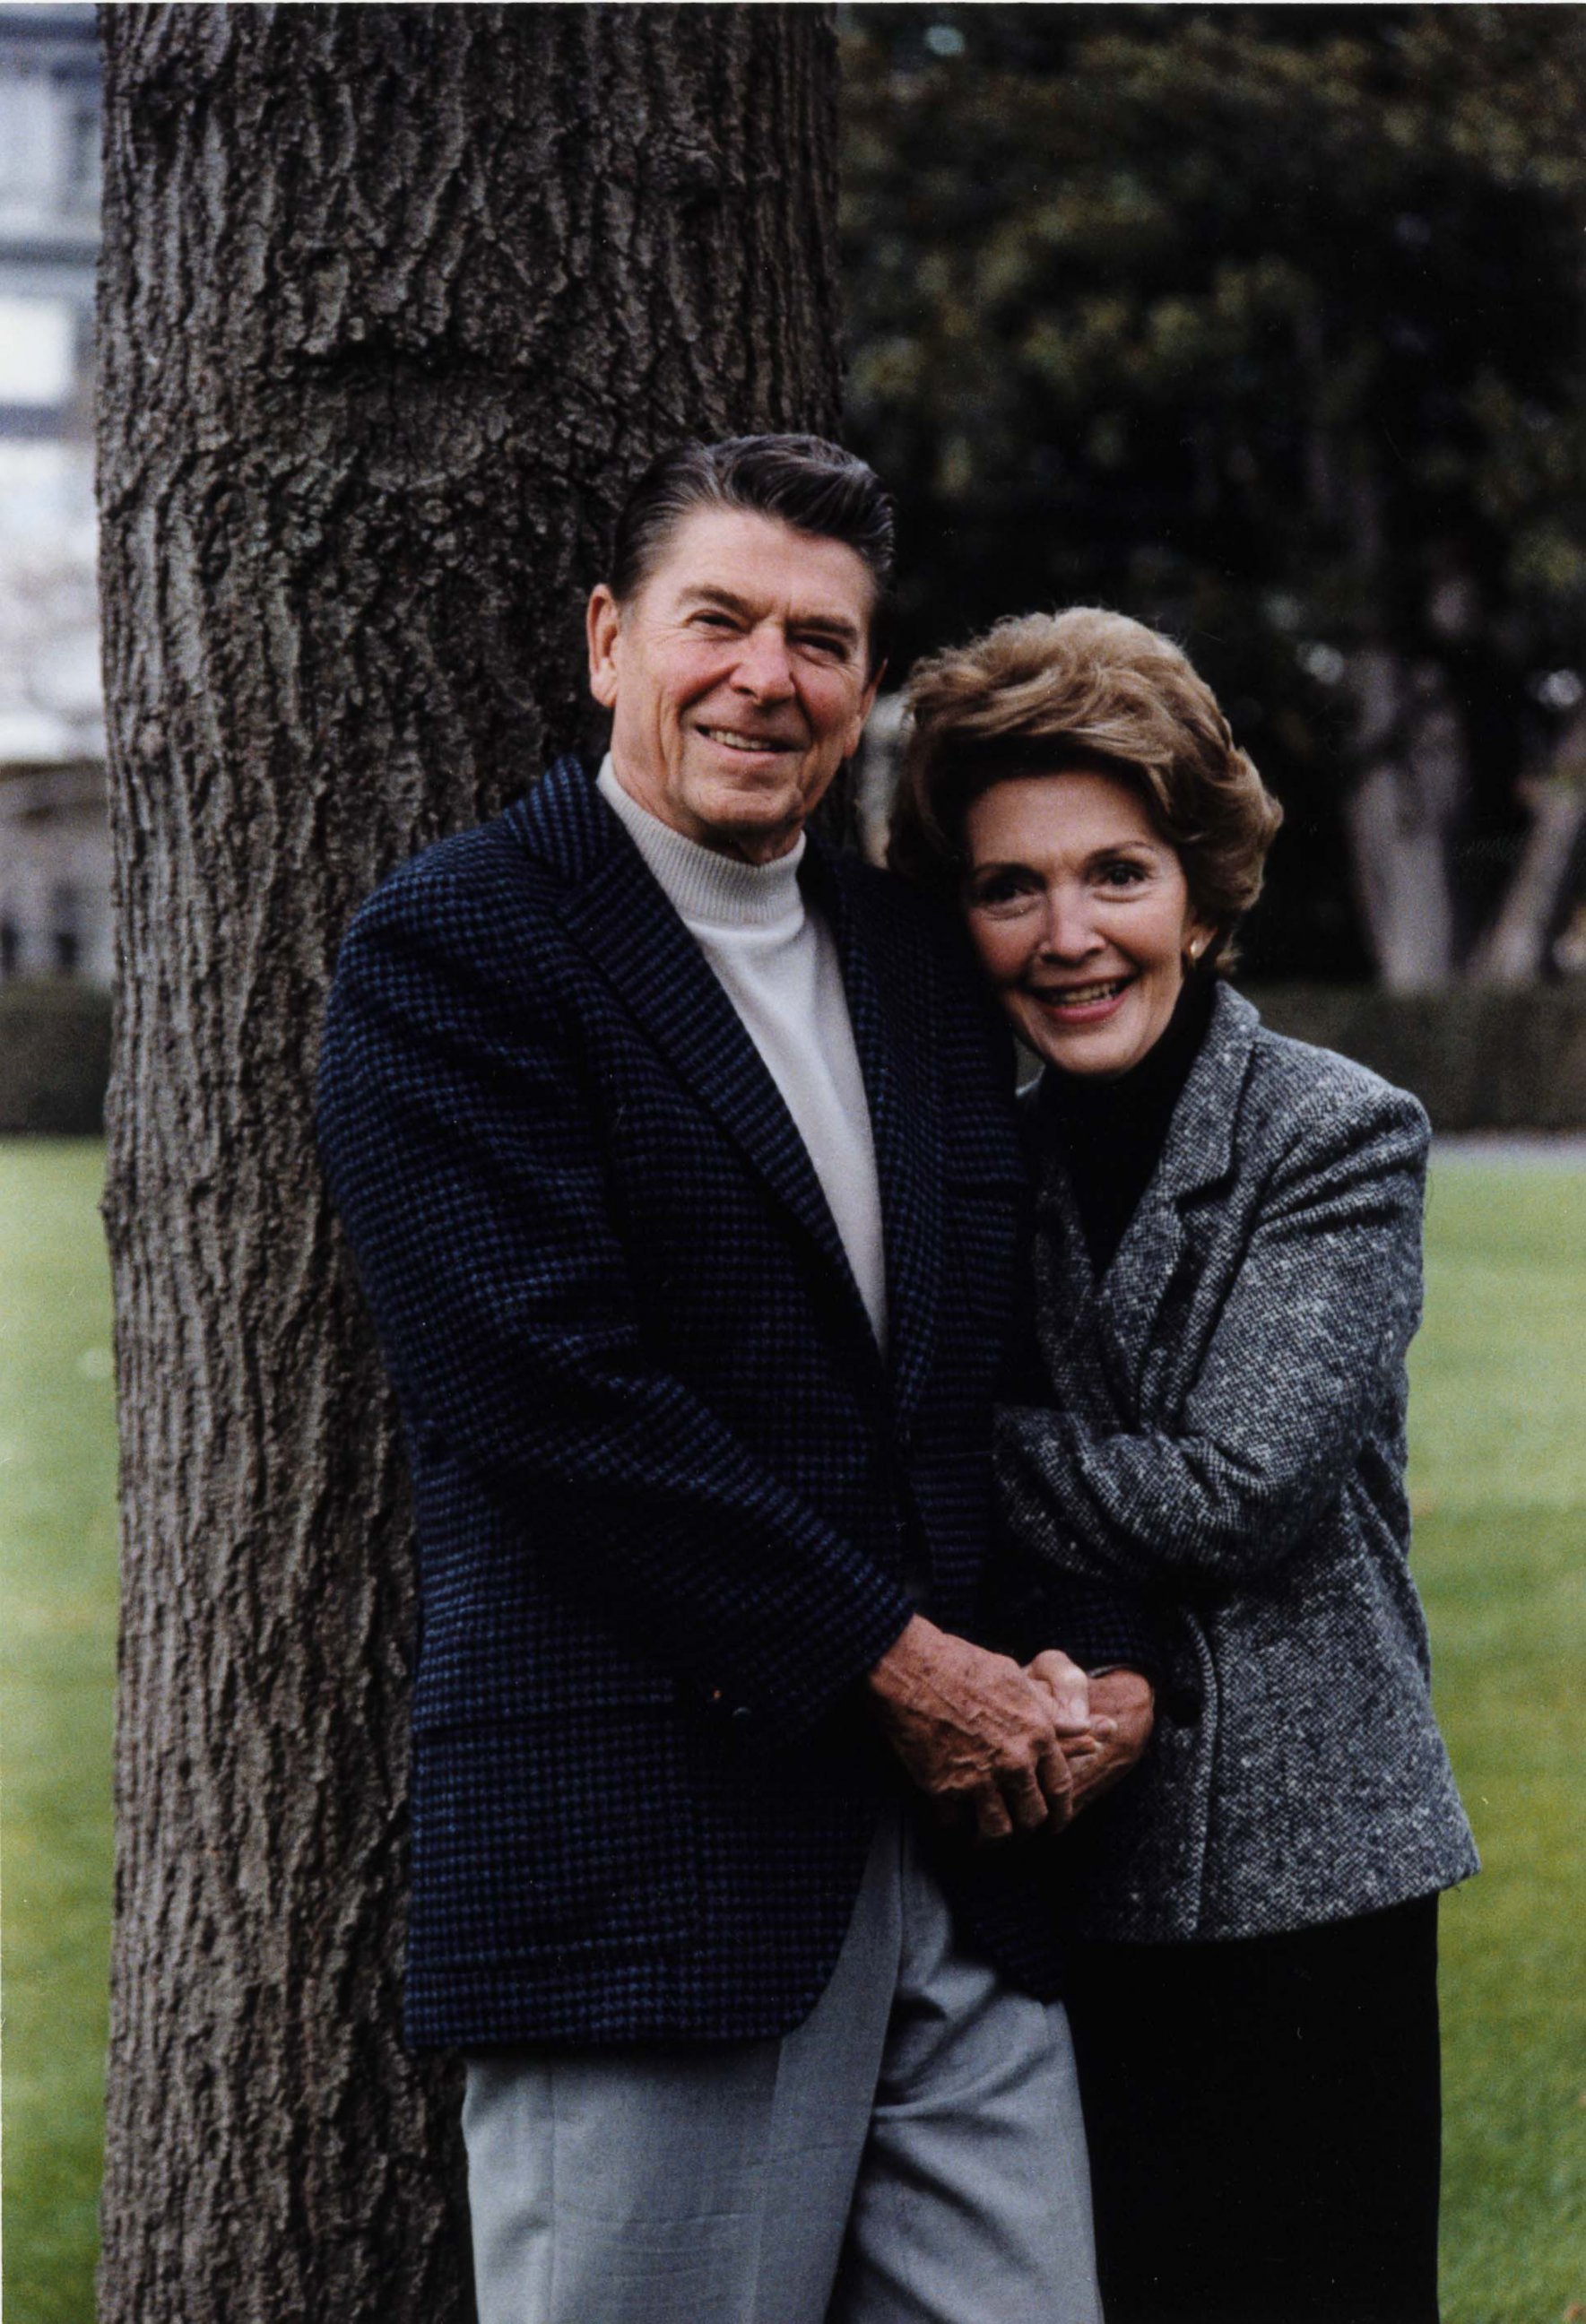 PHOTO: President Reagan and first lady Nancy Reagan pose on the White House South Lawn for a casual official portrait, Nov. 22, 1981.